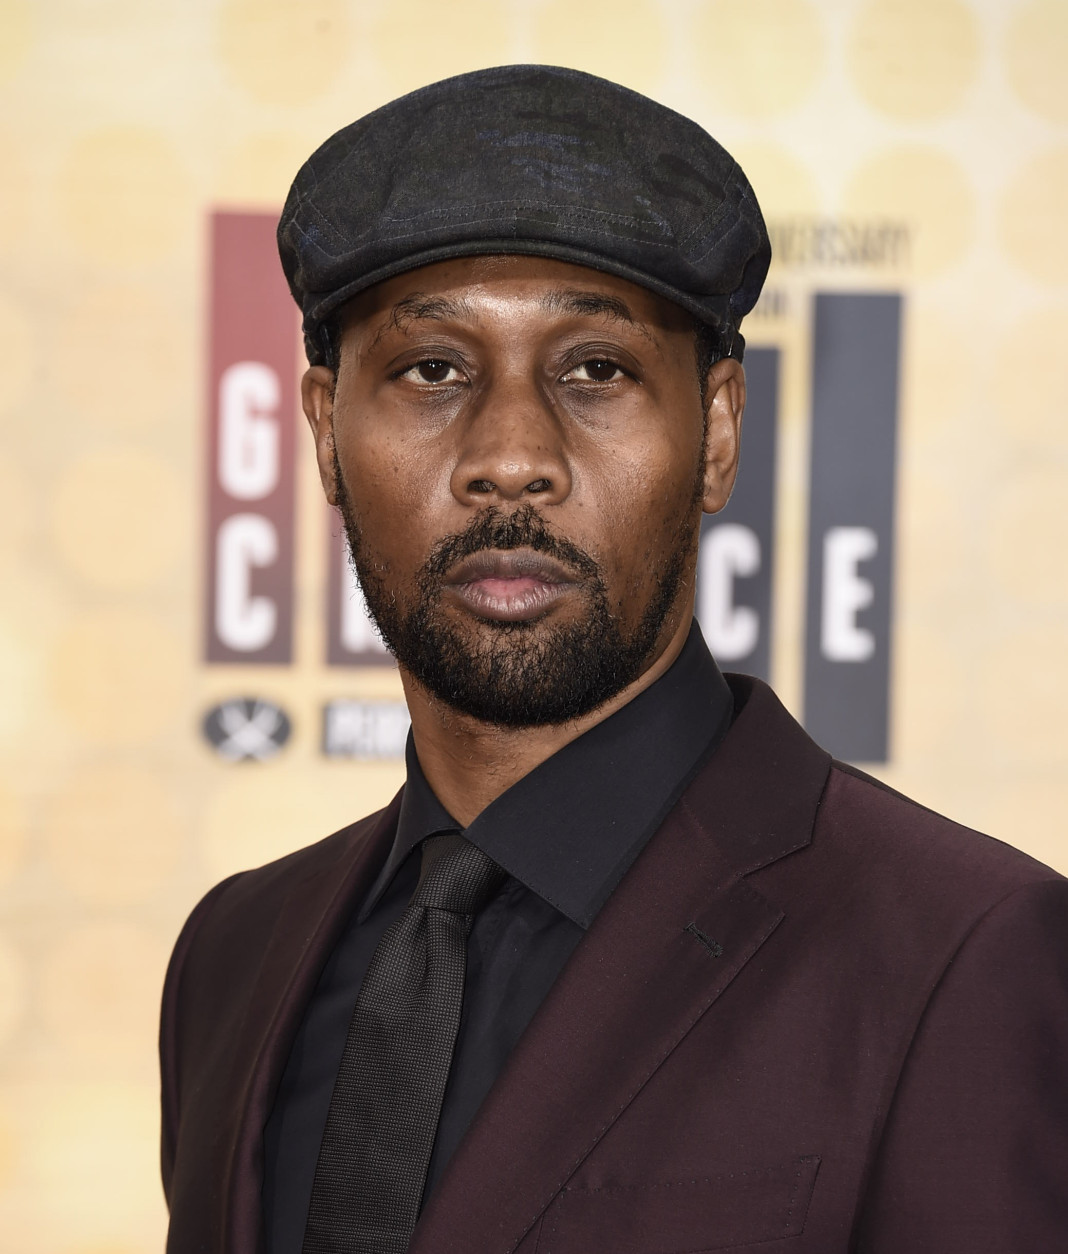 Rza arrives at the Guys Choice Awards at Sony Pictures Studios on Saturday, June 4, 2016, in Culver City, Calif. (Photo by Dan Steinberg/Invision/AP)